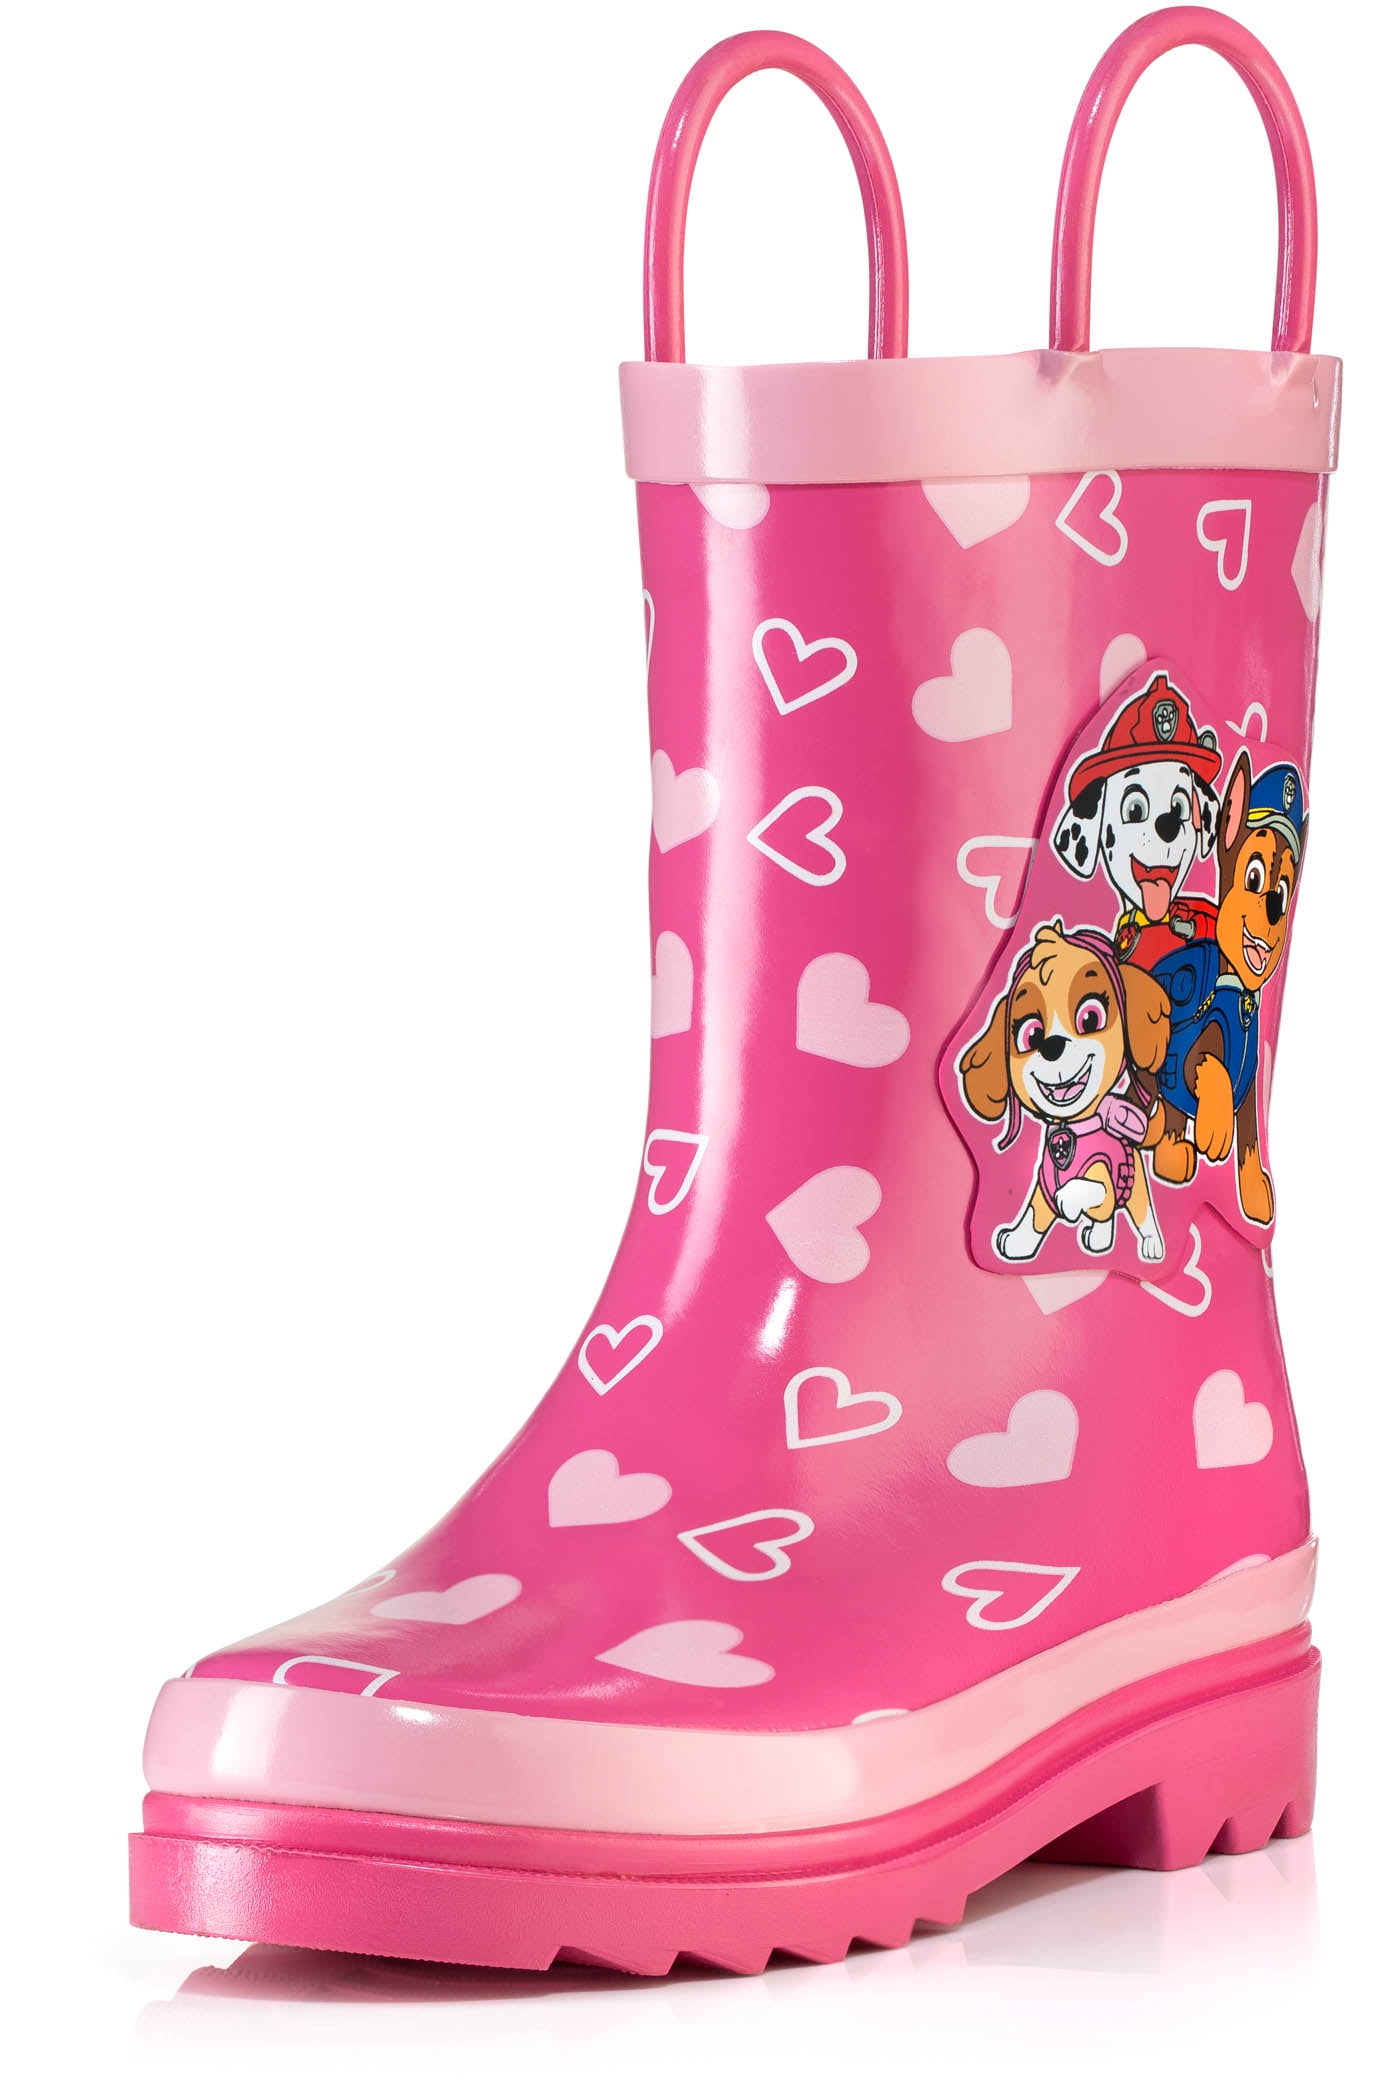 Paw Patrol GirlsSweet as Can Be Wellies Rain Boots